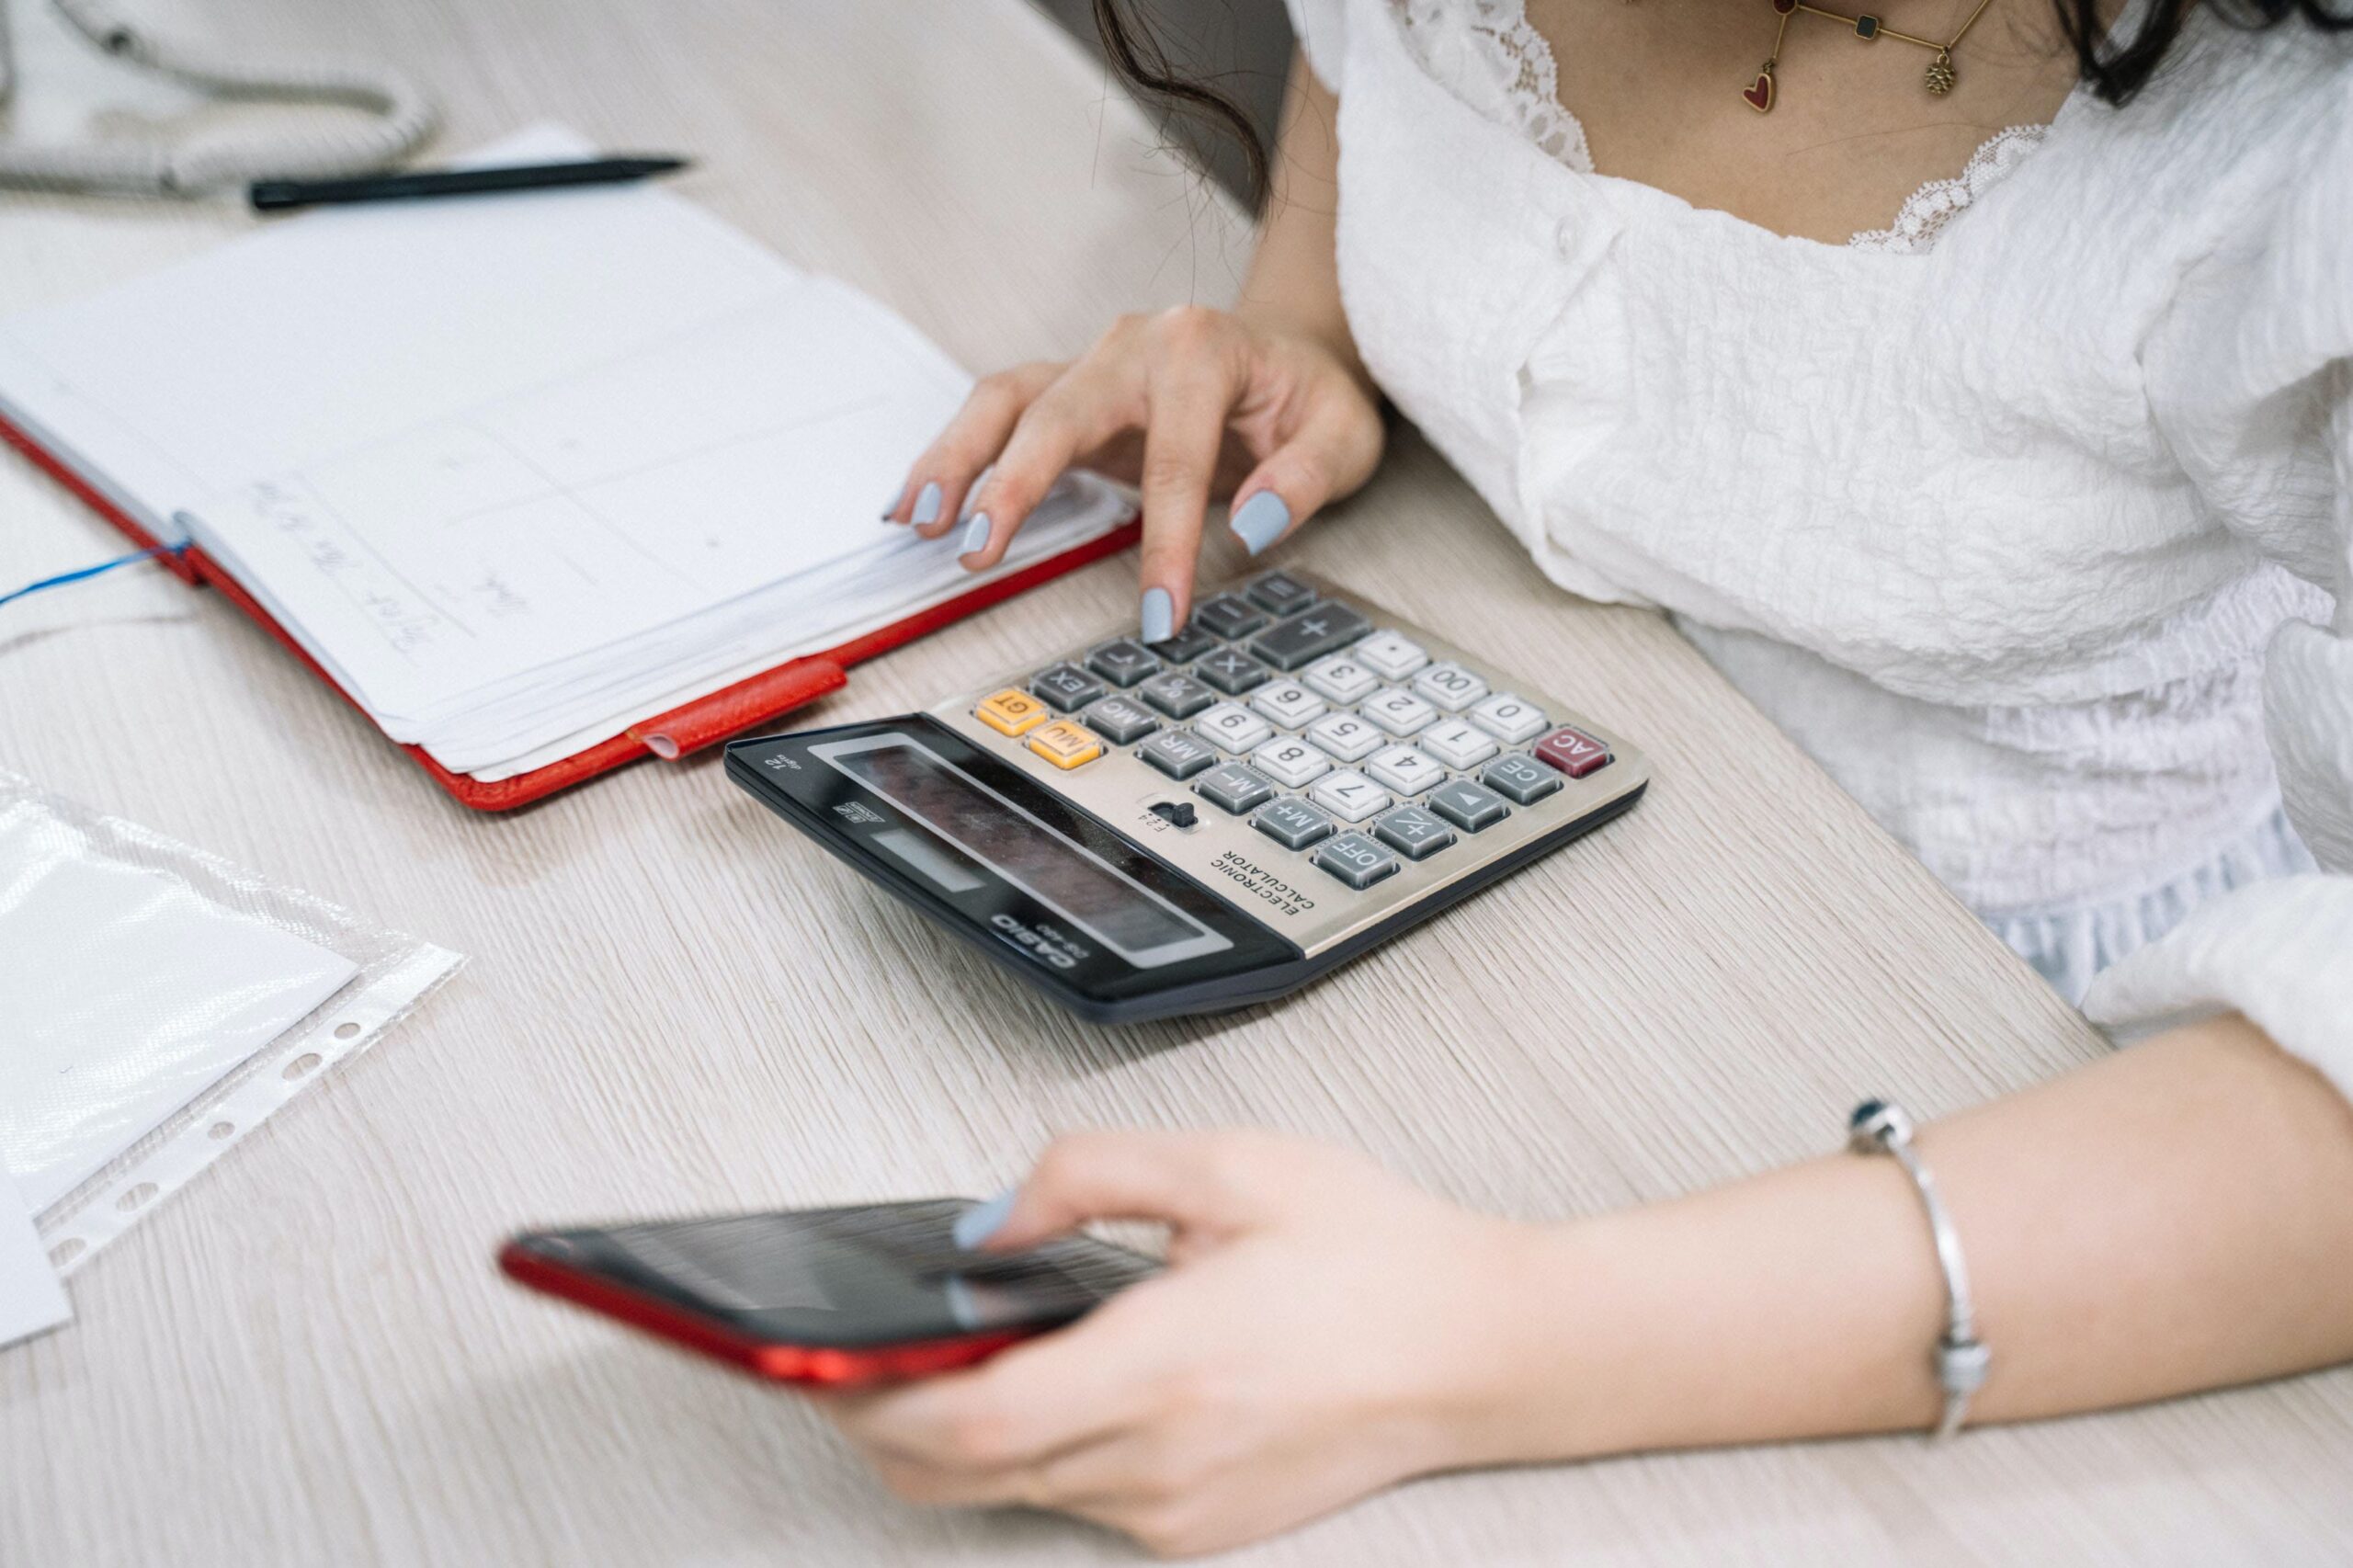 Woman using a calculator for some calculations